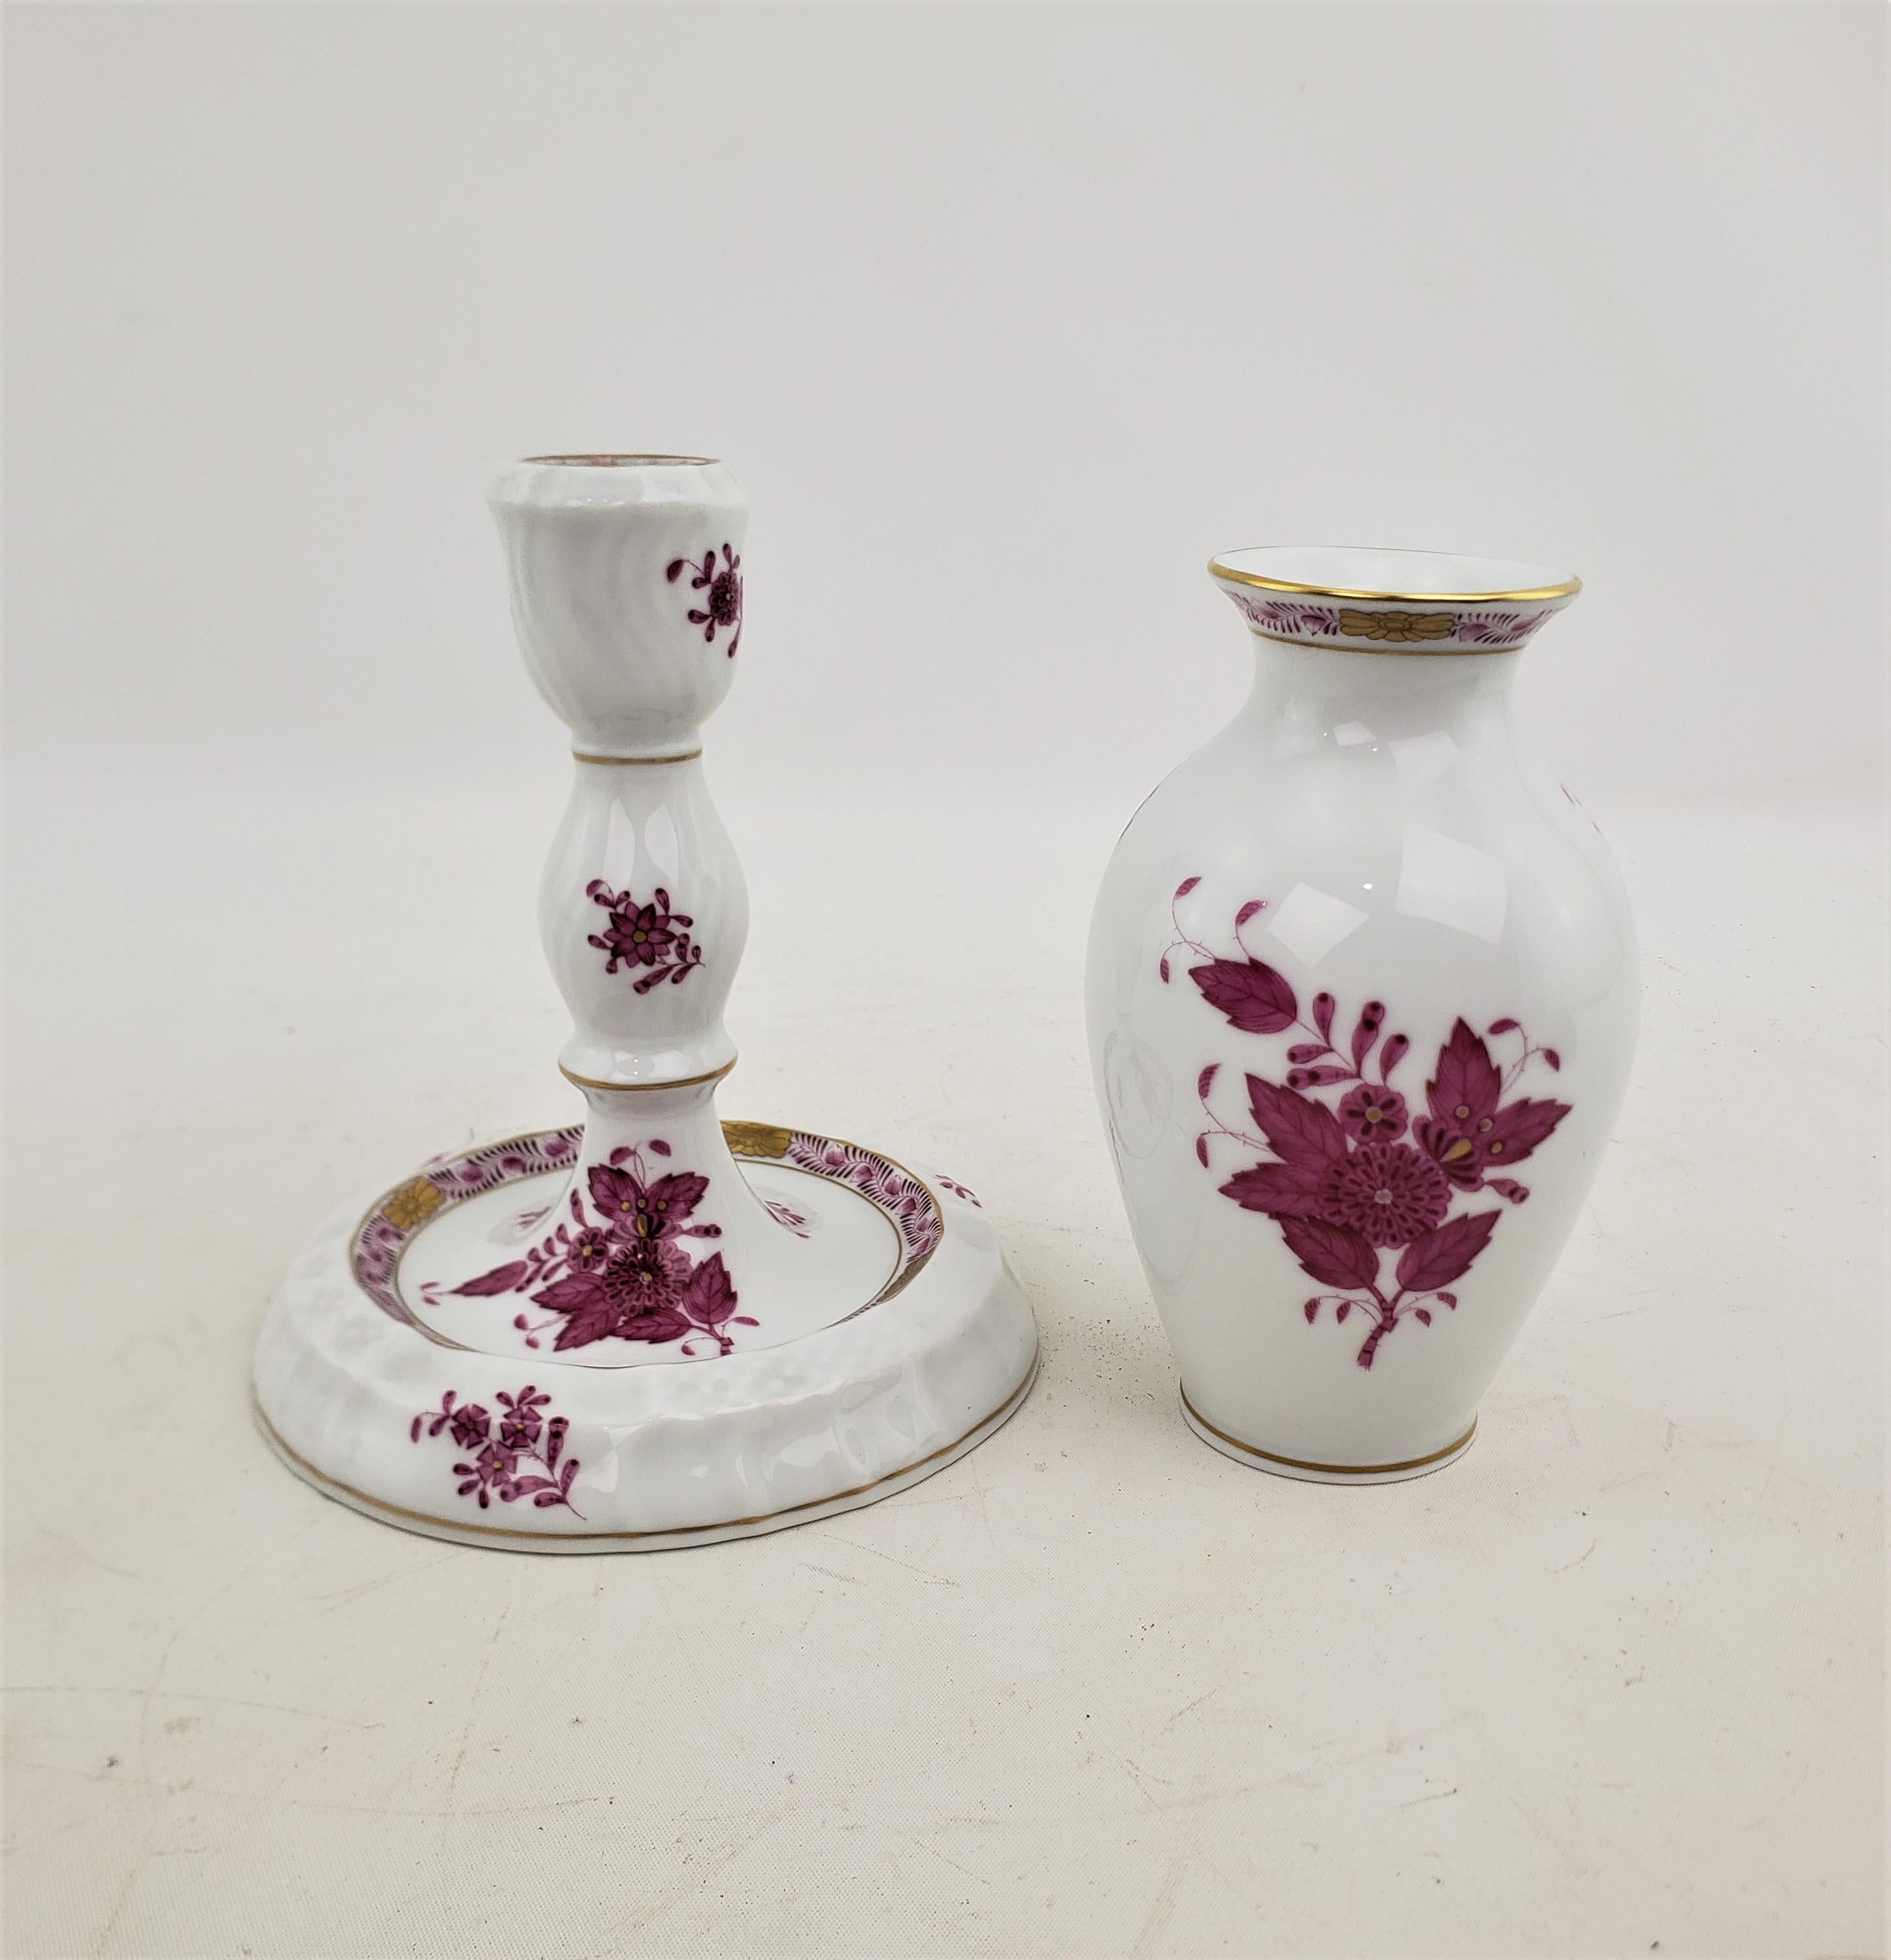 This candlestick and vase were made by the well known Herend factory of Hungary in approximately 1970 in their signature Chinaoserie style. The pair is composed of porcelain with hand painted decoration in their Chinese Bouquet pattern in a